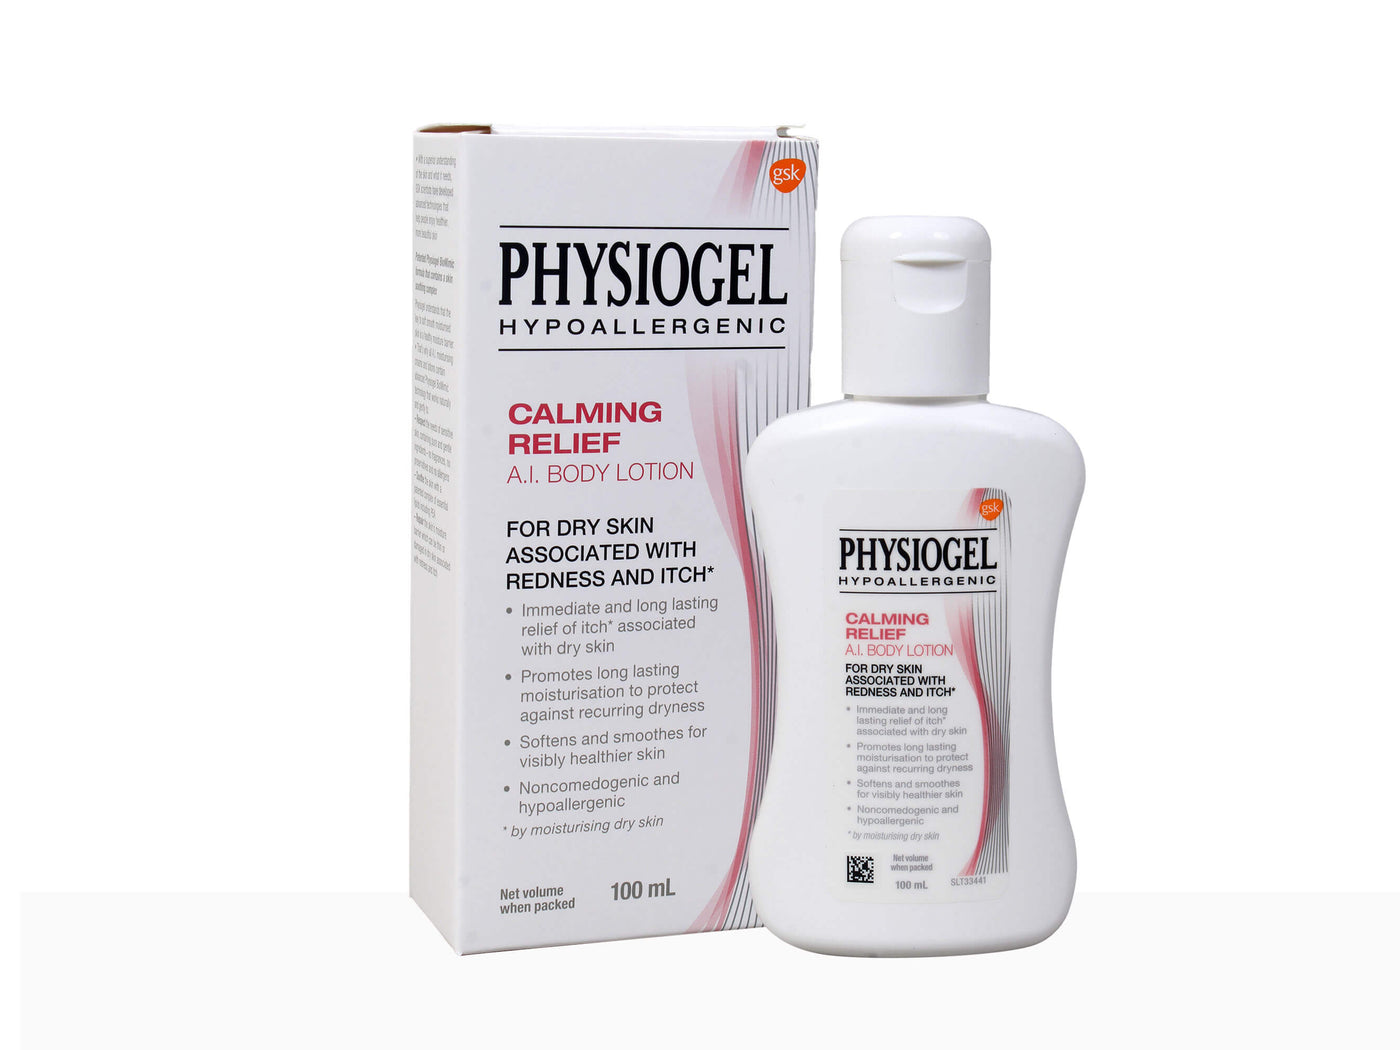 Physiogel Hypoallergenic Calming Relief A.I. Body Lotion